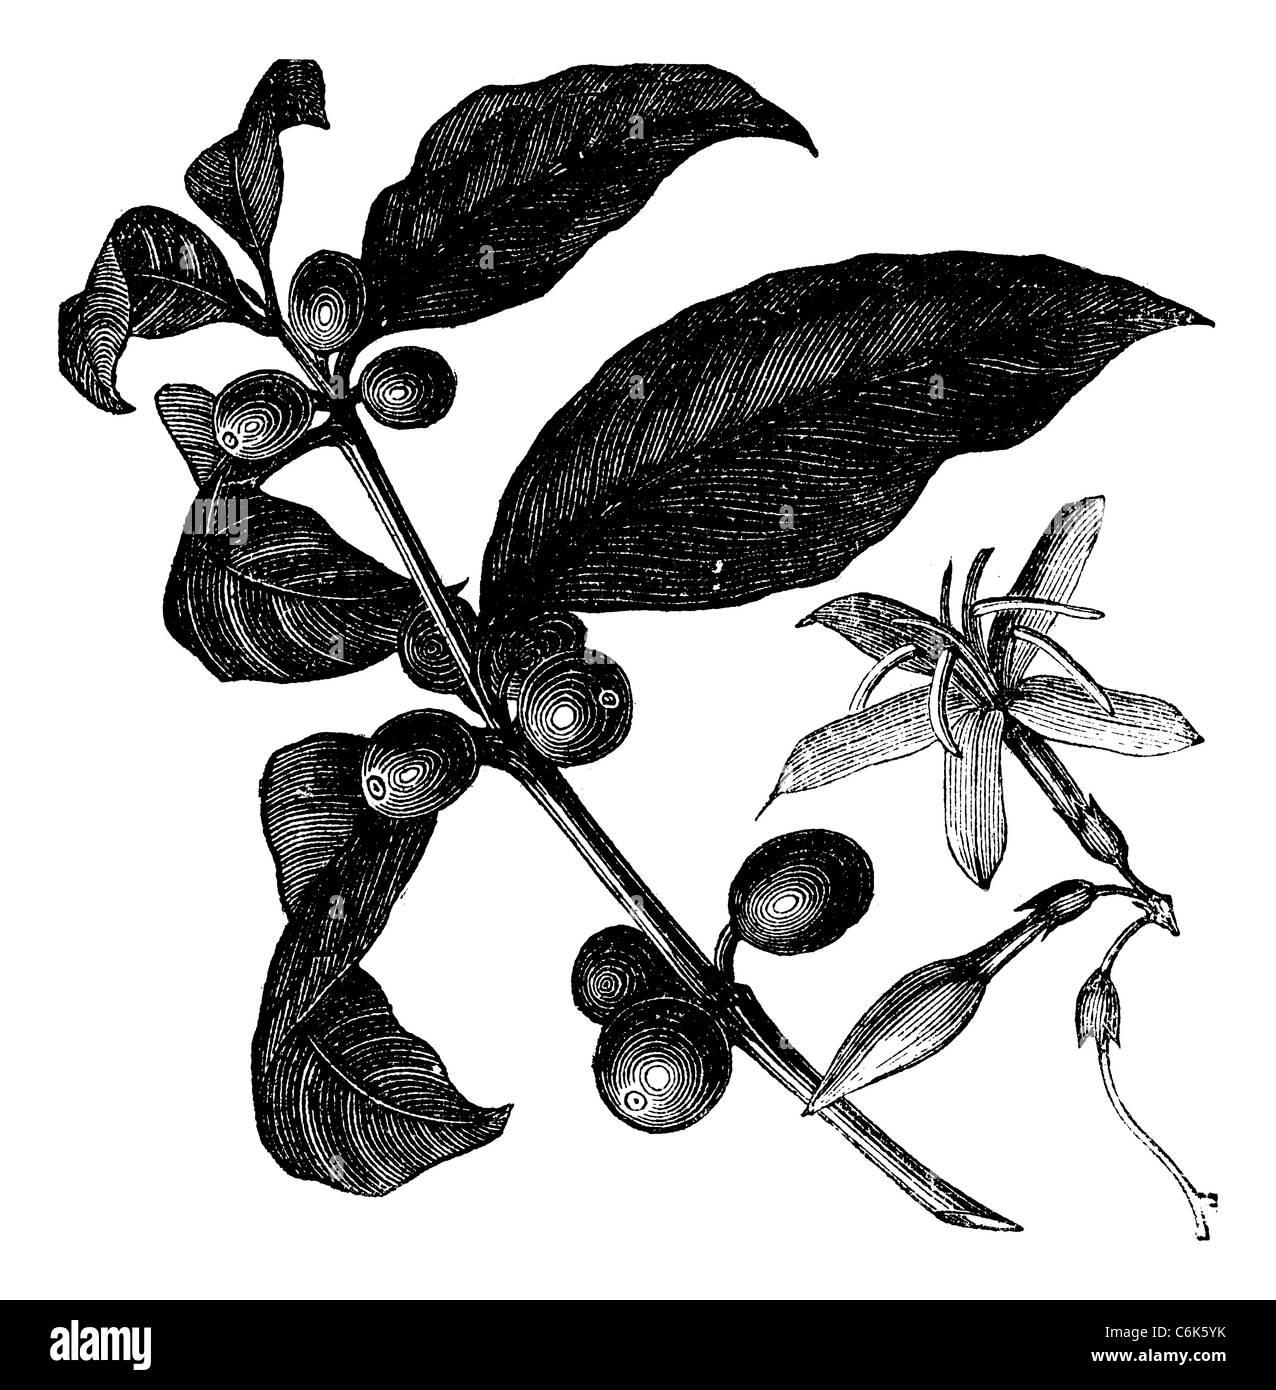 Coffee shrub, vintage engraving. Vintage engraved illustration of Coffee, seed and flower isolated against a white background. Stock Photo